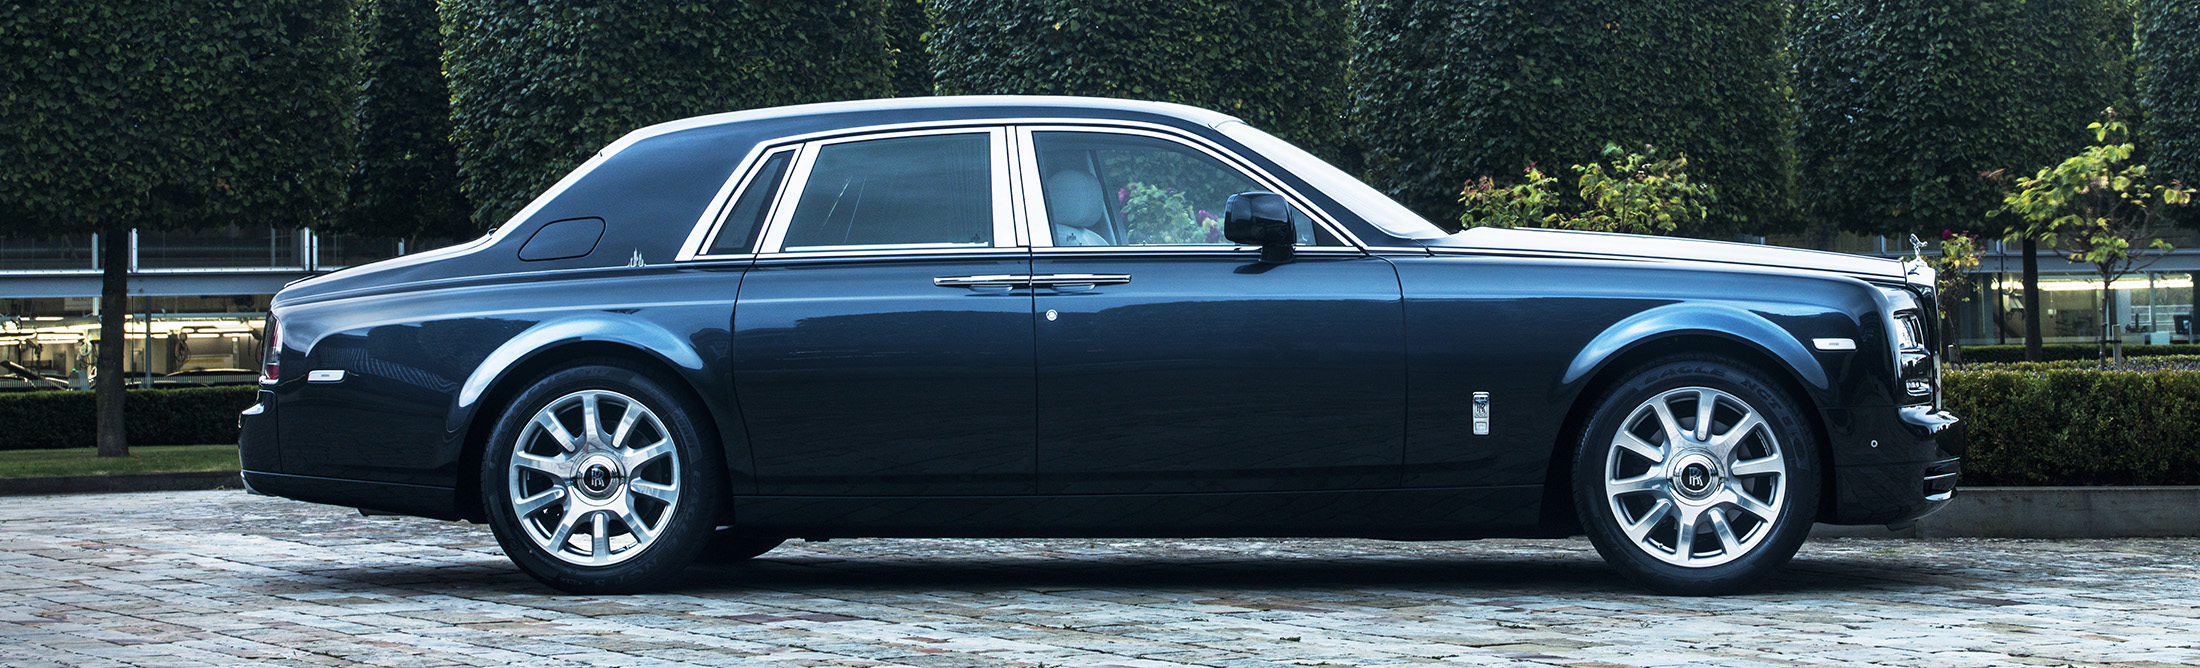 The first Rolls-Royce SUV has tricks that might actually justify its price  tag